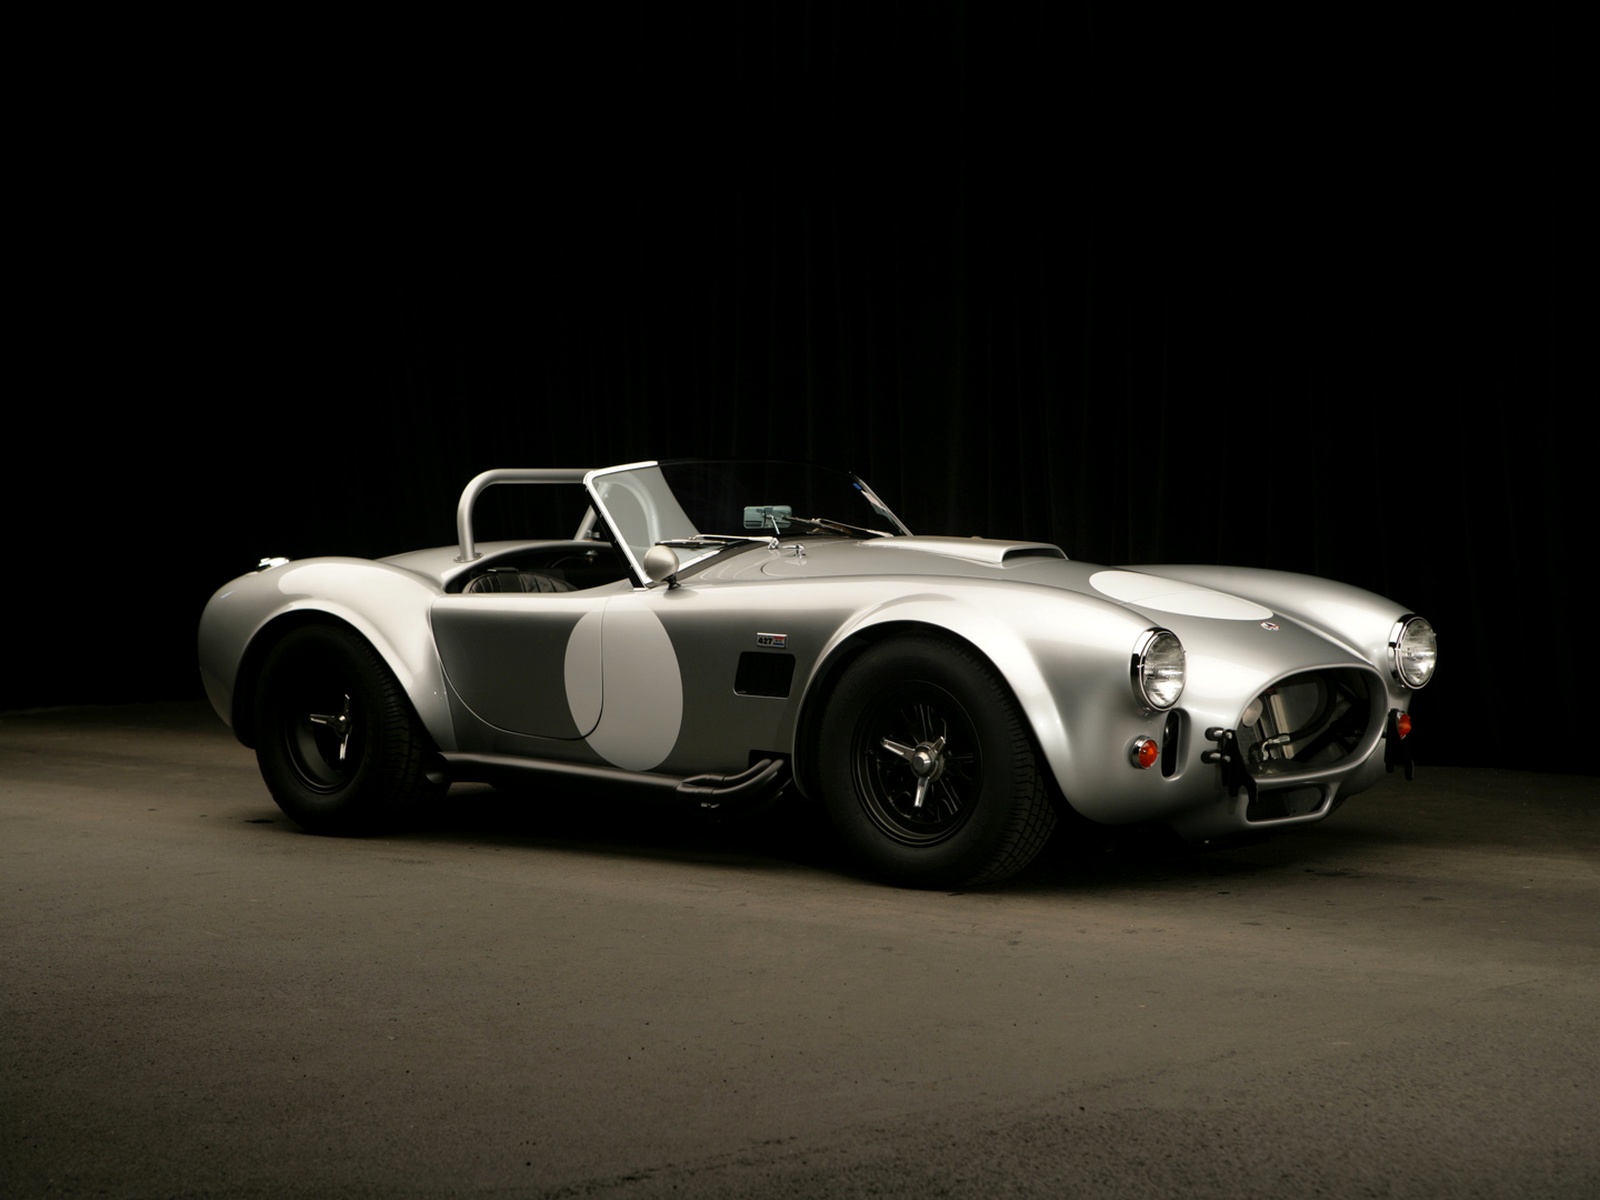 1965, Shelby, Cobra, 427, S c, Competition, Mkiii, Race, Racing, Supercar, Supercars, Muscle, Classic Wallpaper